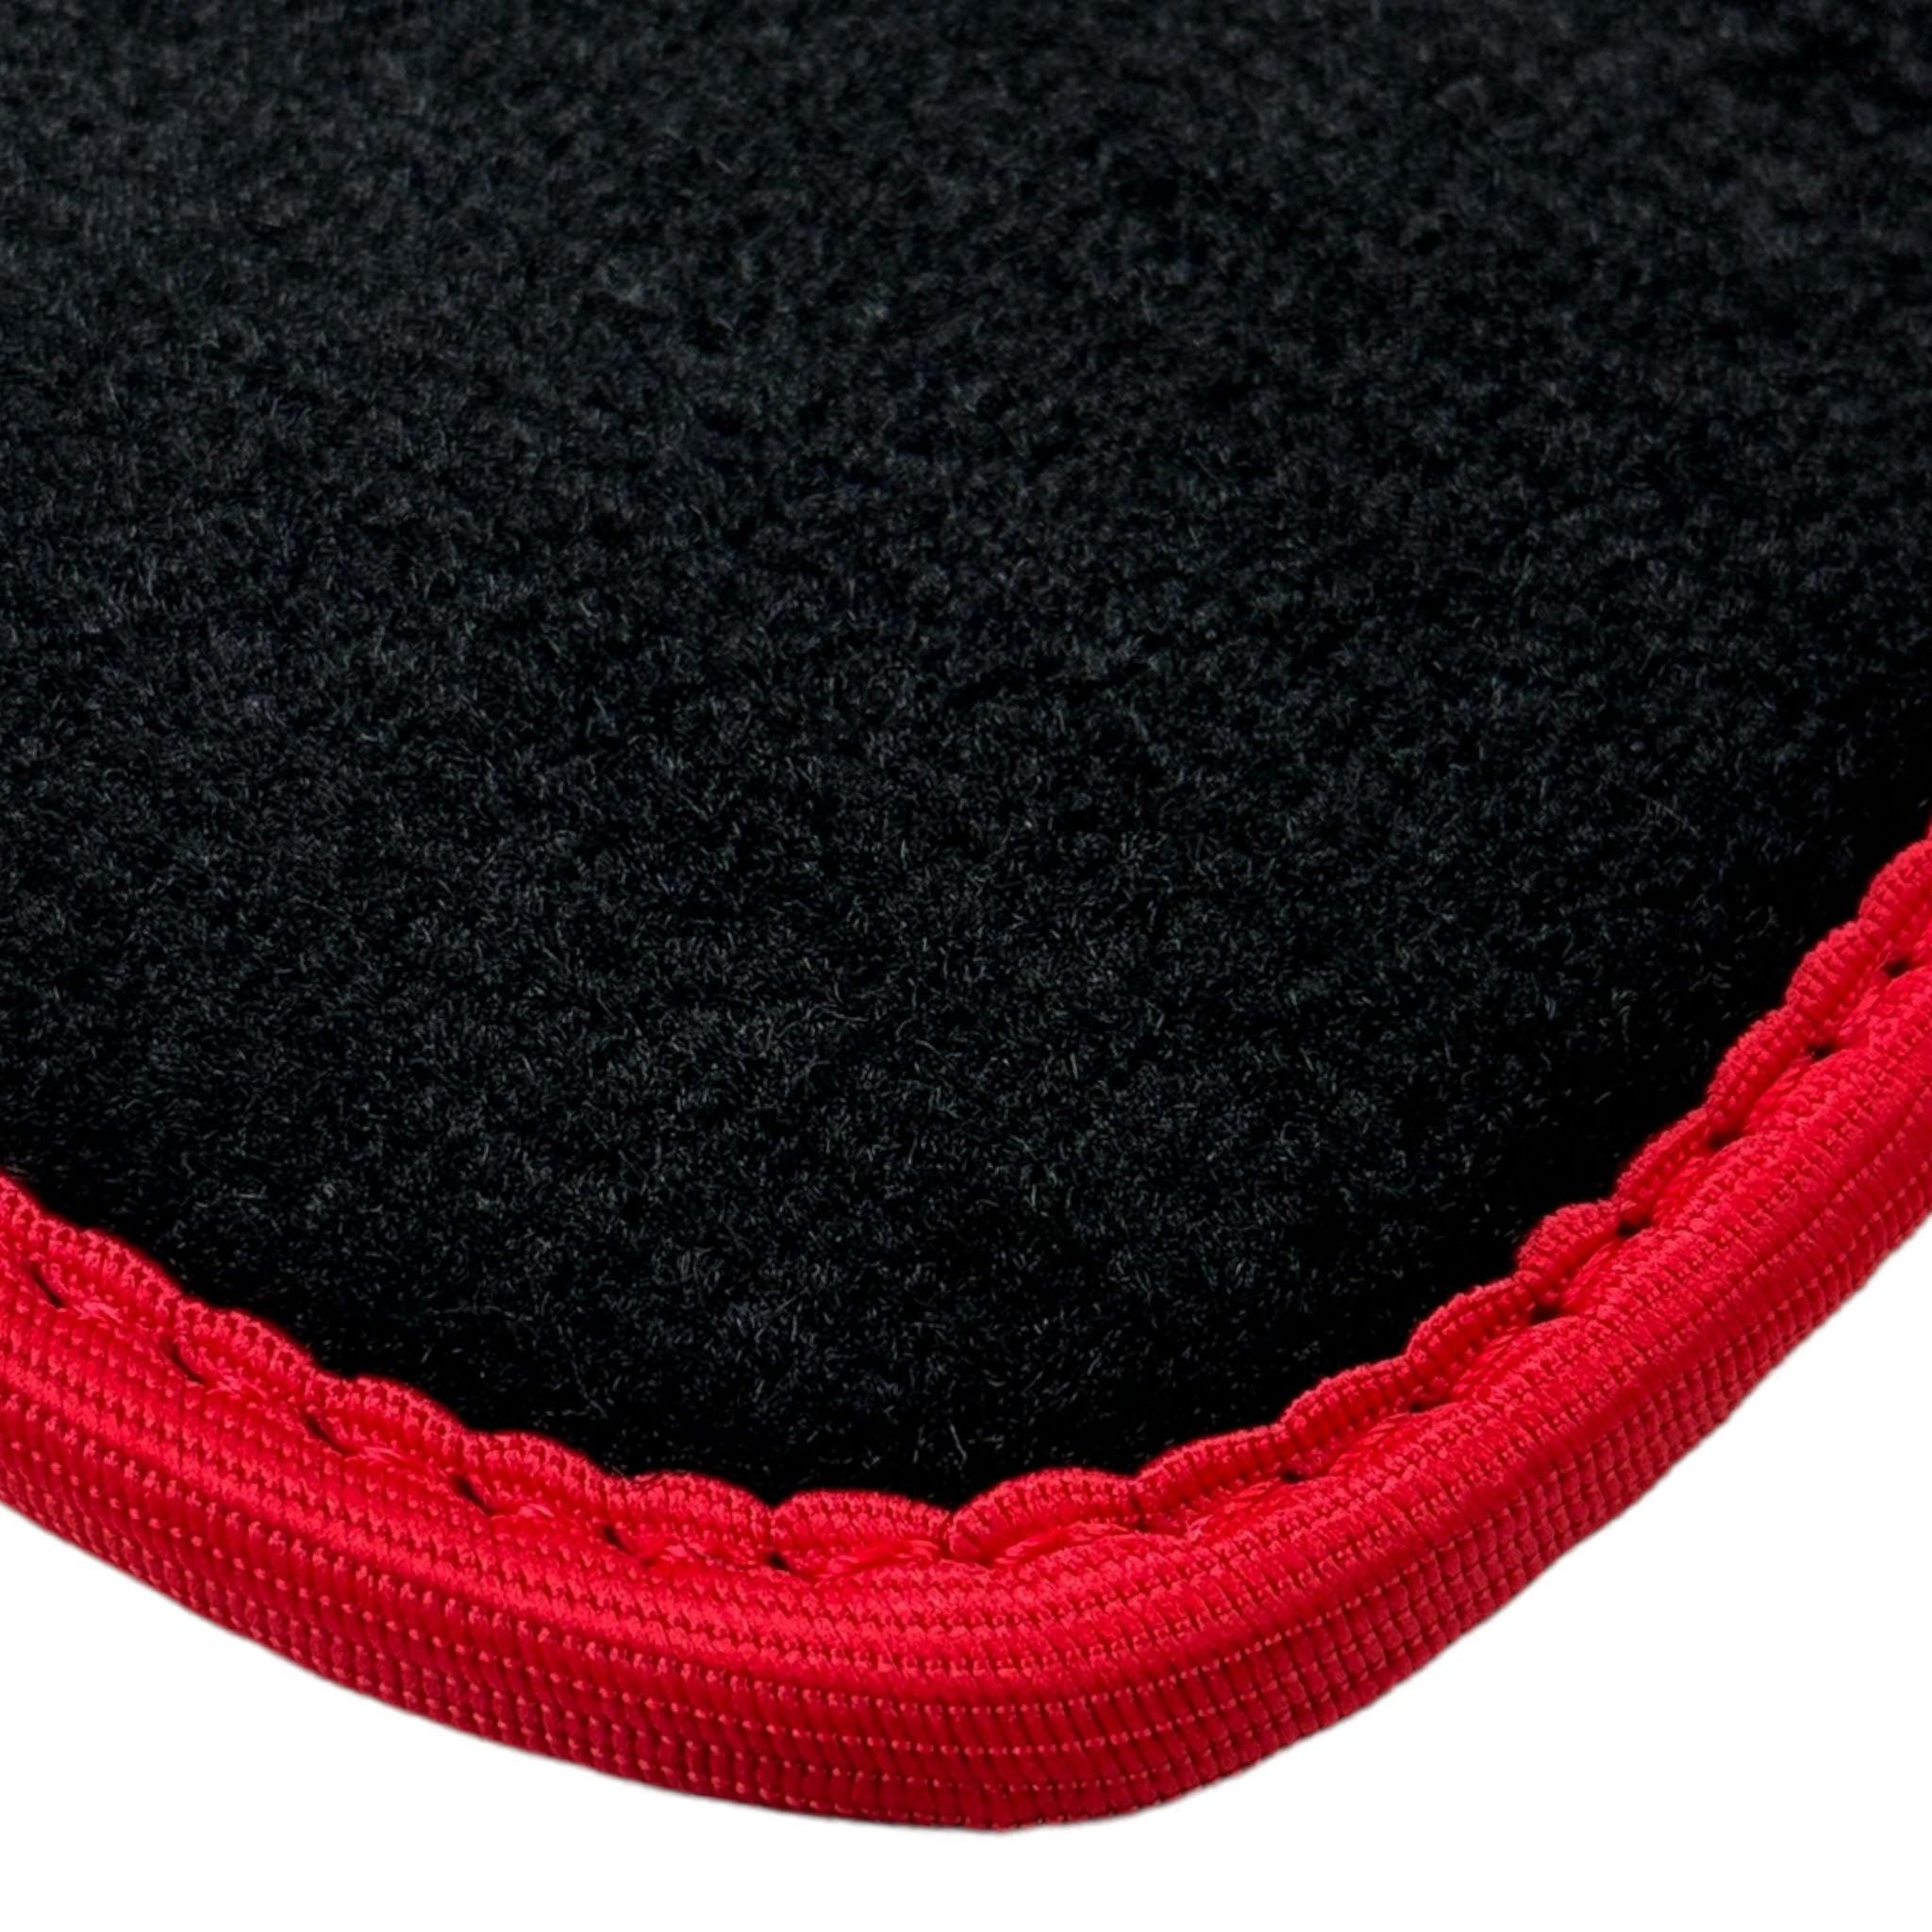 Black Floor Floor Mats For BMW 3 Series E46 Coupe | Red Trim